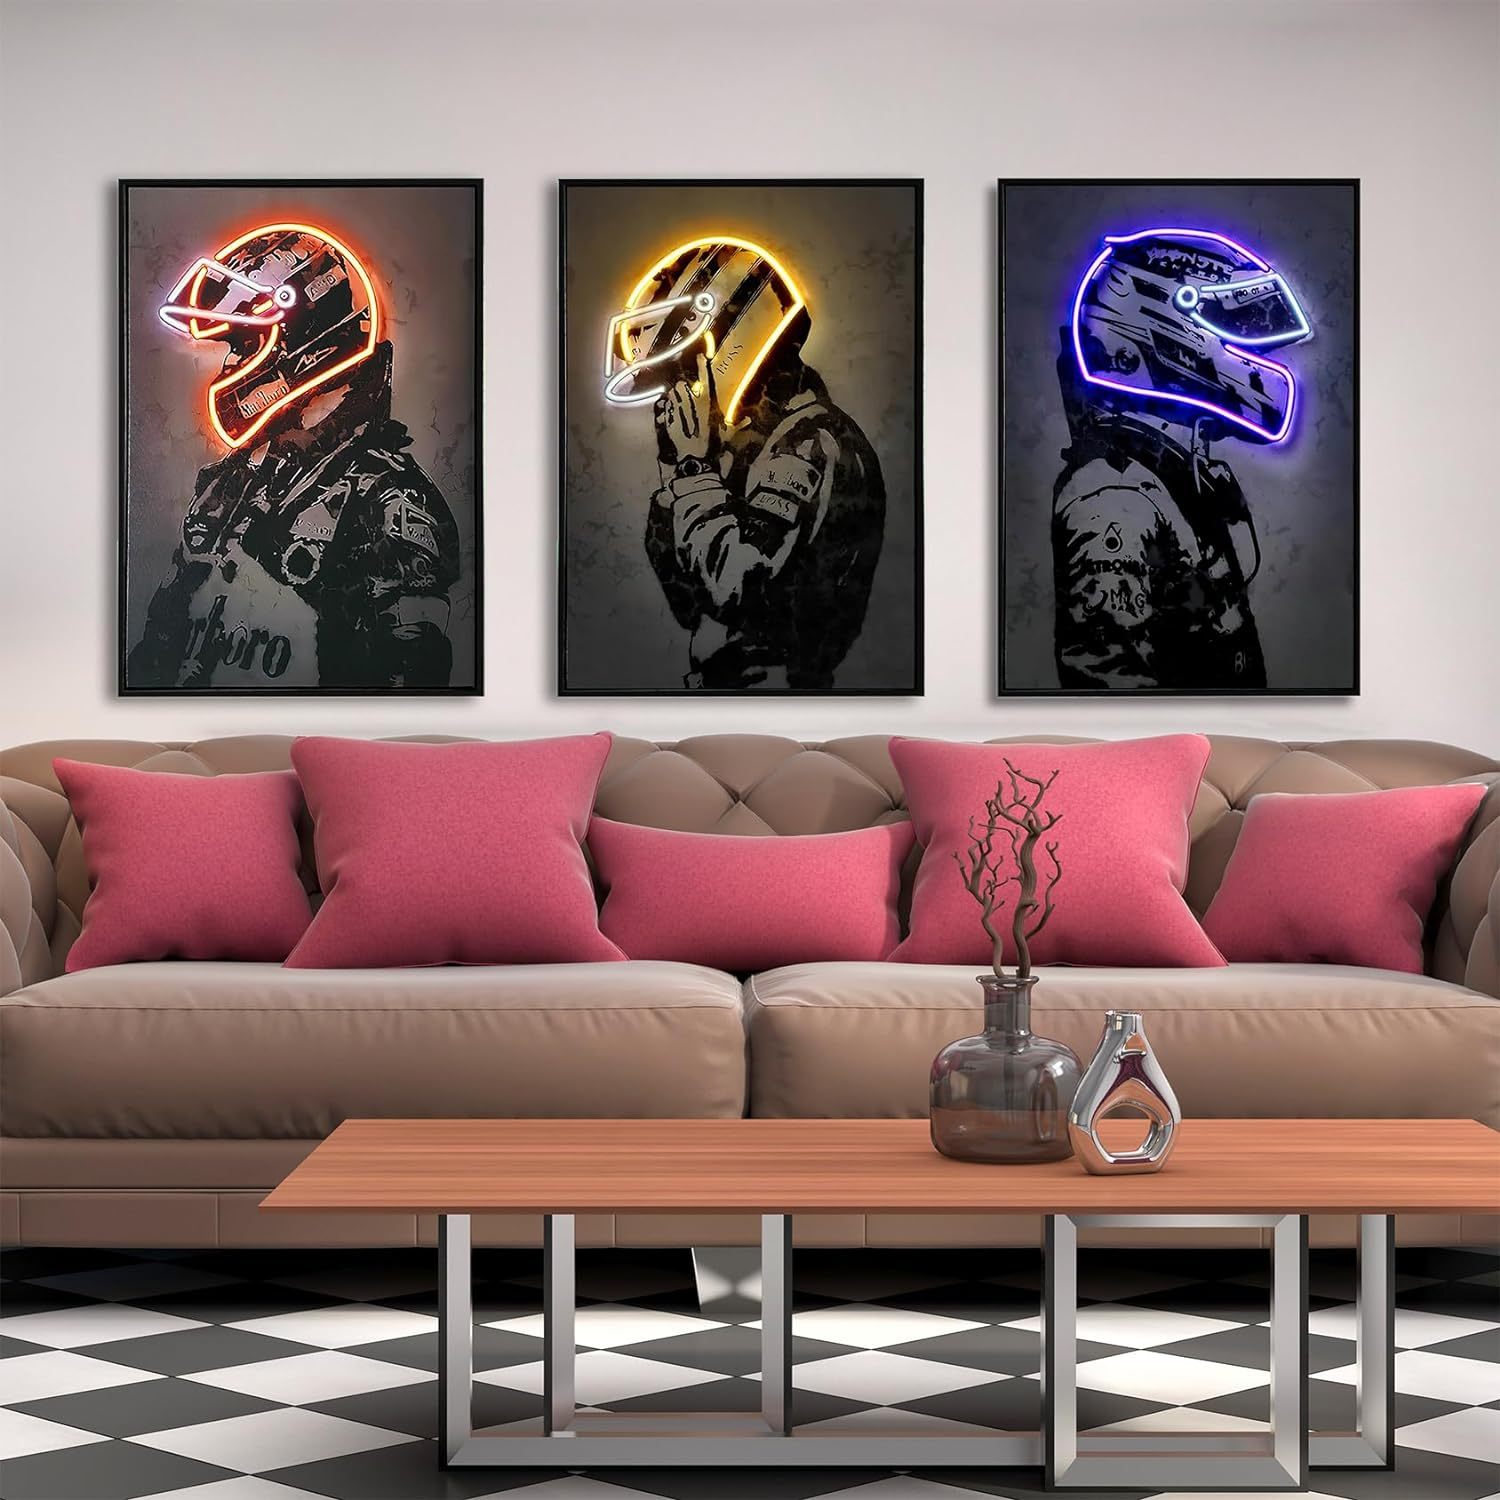 

Racing Superstar Wall Decor Canvas Prints- 3pcs Set Sports Painting Art Decor, Neon Racing Driver And Motorcycle Wall Art For Bedroom Living Room Home Decor, Wrap Framed (colorful, 16x24)